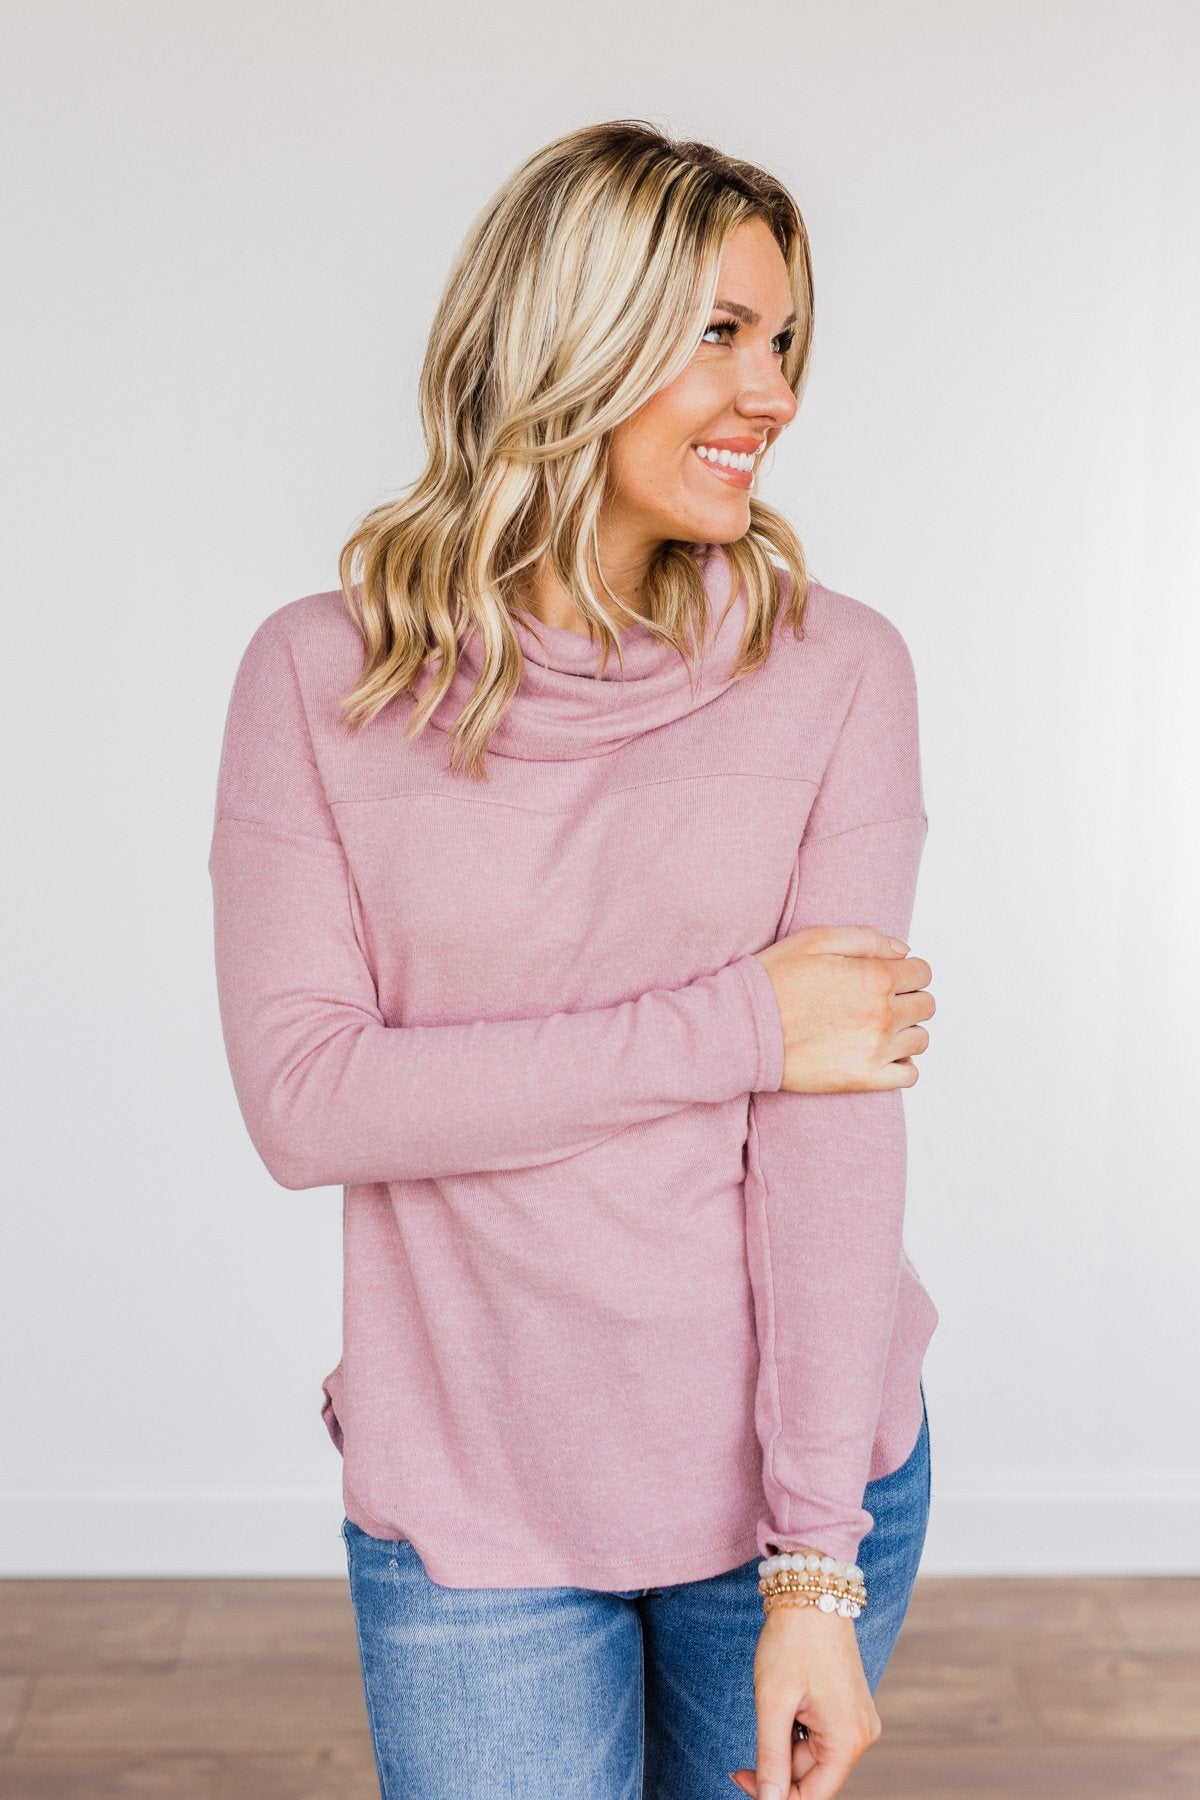 Always Winning Long Sleeve Cowl Neck Top- Orchid